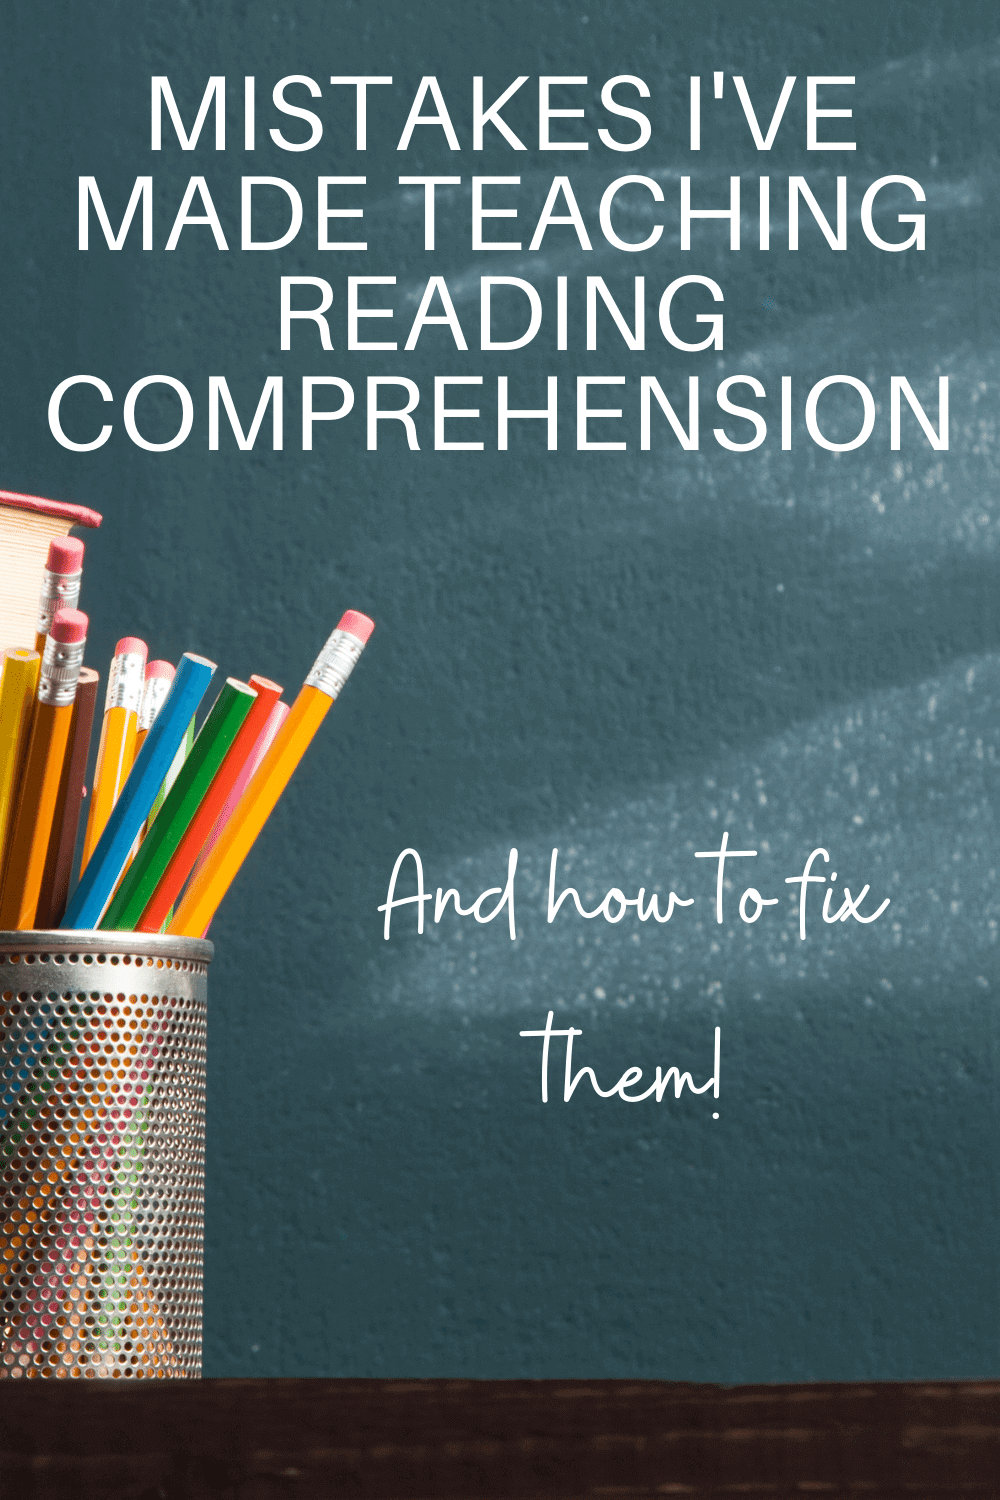 pencils in front of a chalkboard with words mistakes i've made teaching reading comprhension and how to fix them.